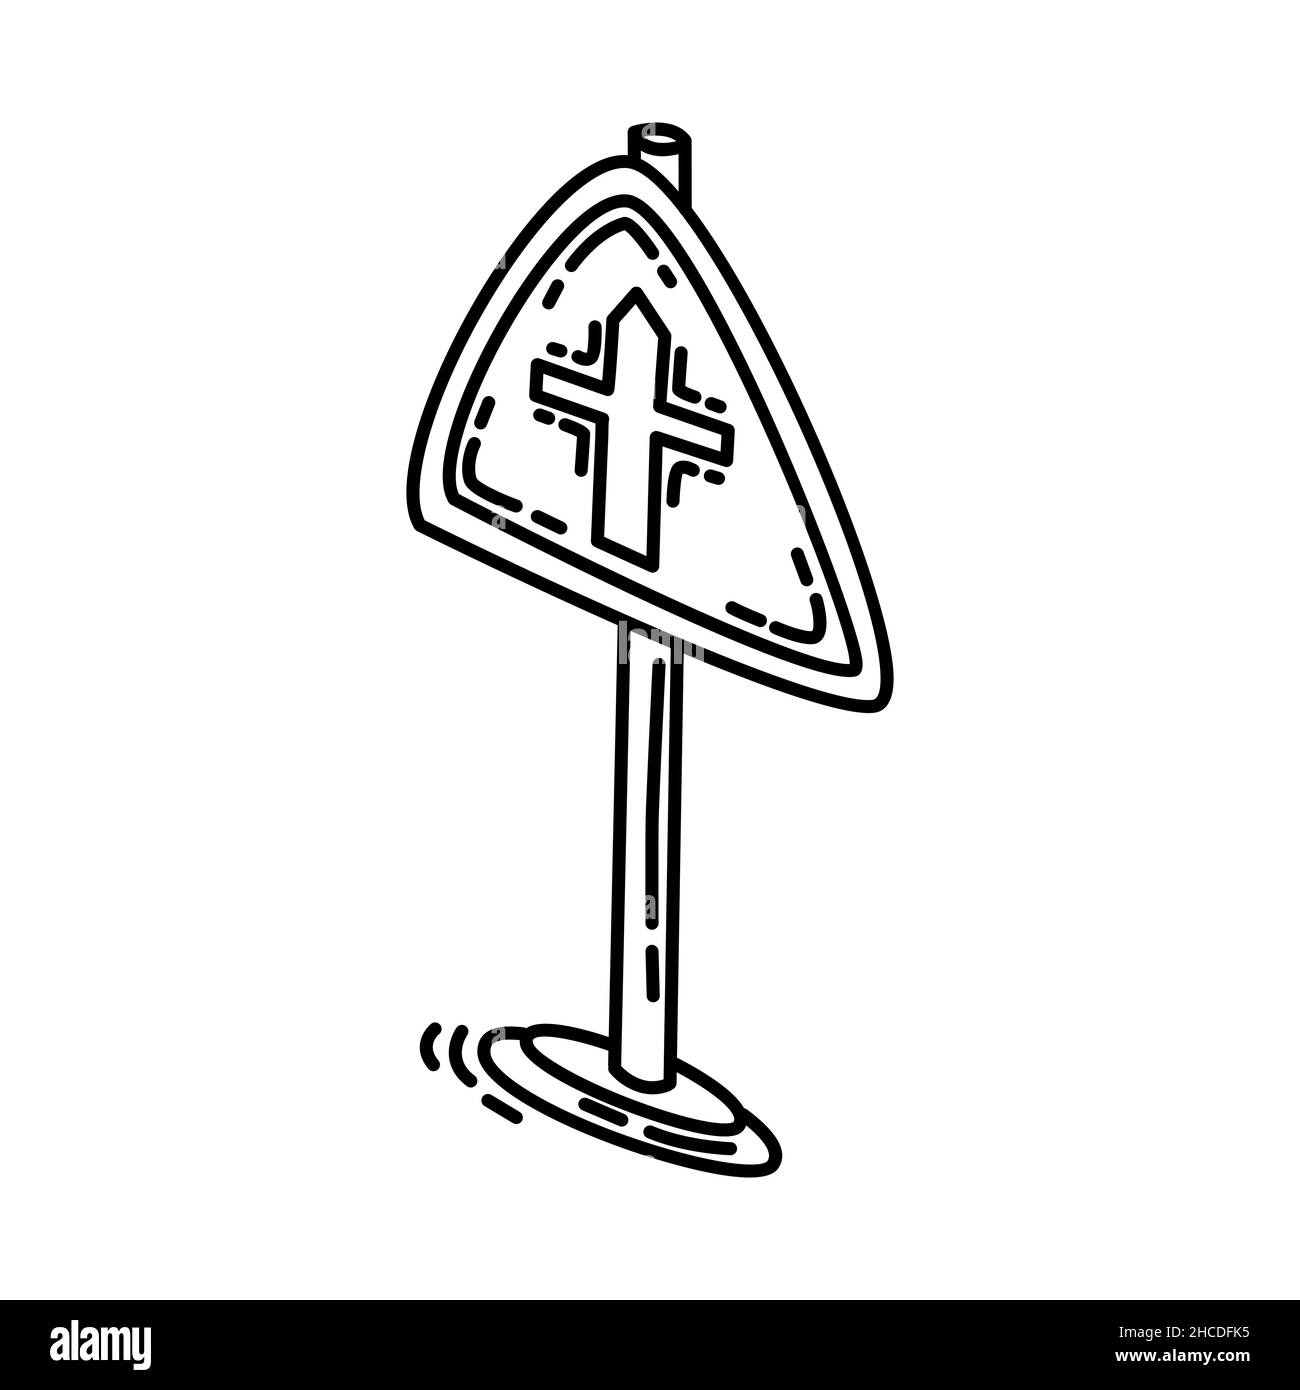 Crossroads Ahead Part of Traffic Signs Hand Drawn Icon Set Vector. Stock Vector